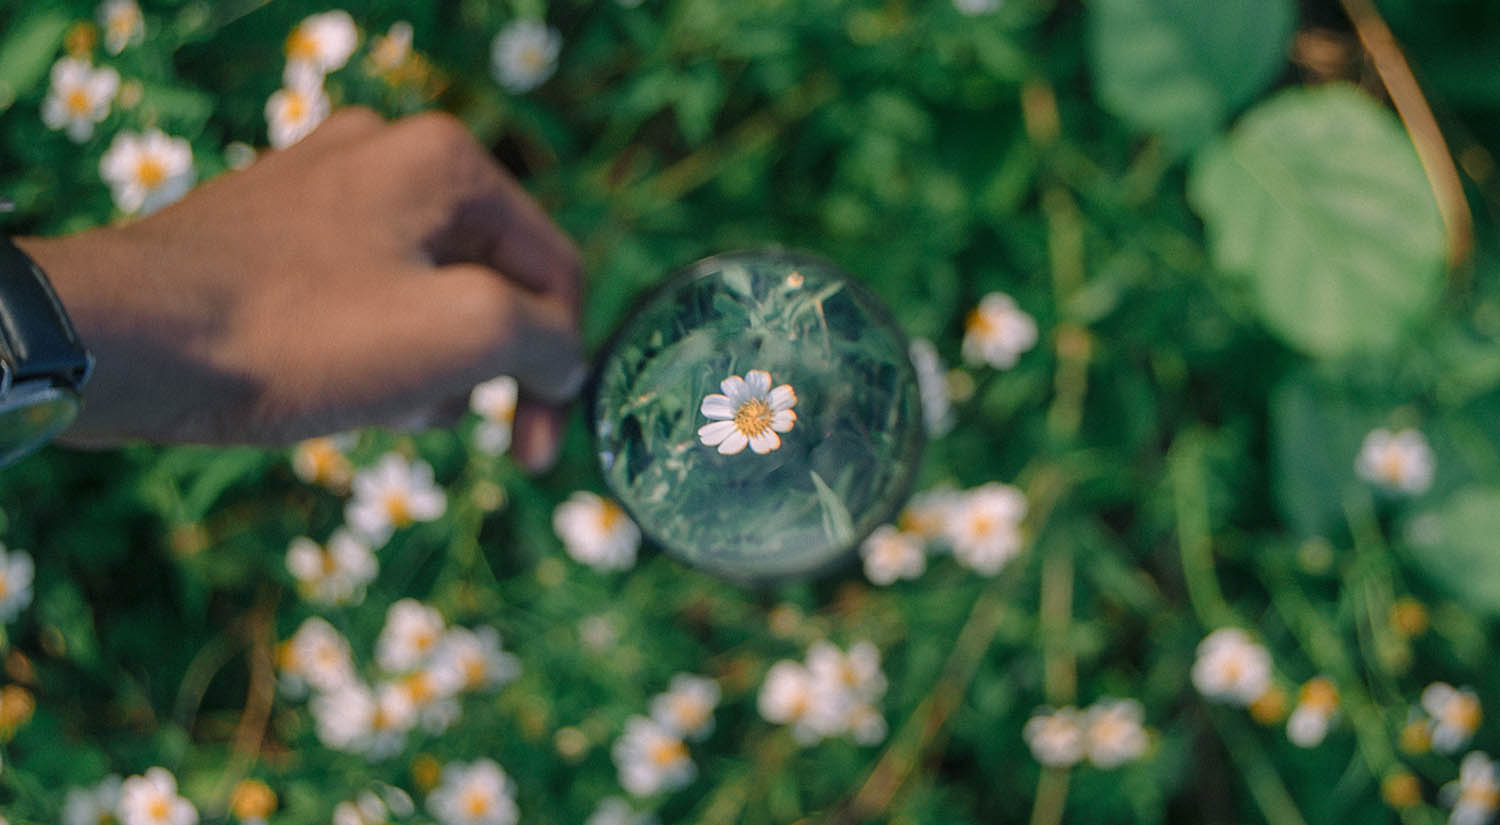 A person's hand holds a magnifying glass above the grassy ground. The only thing in focus is the tiny white daisy visible through the glass.